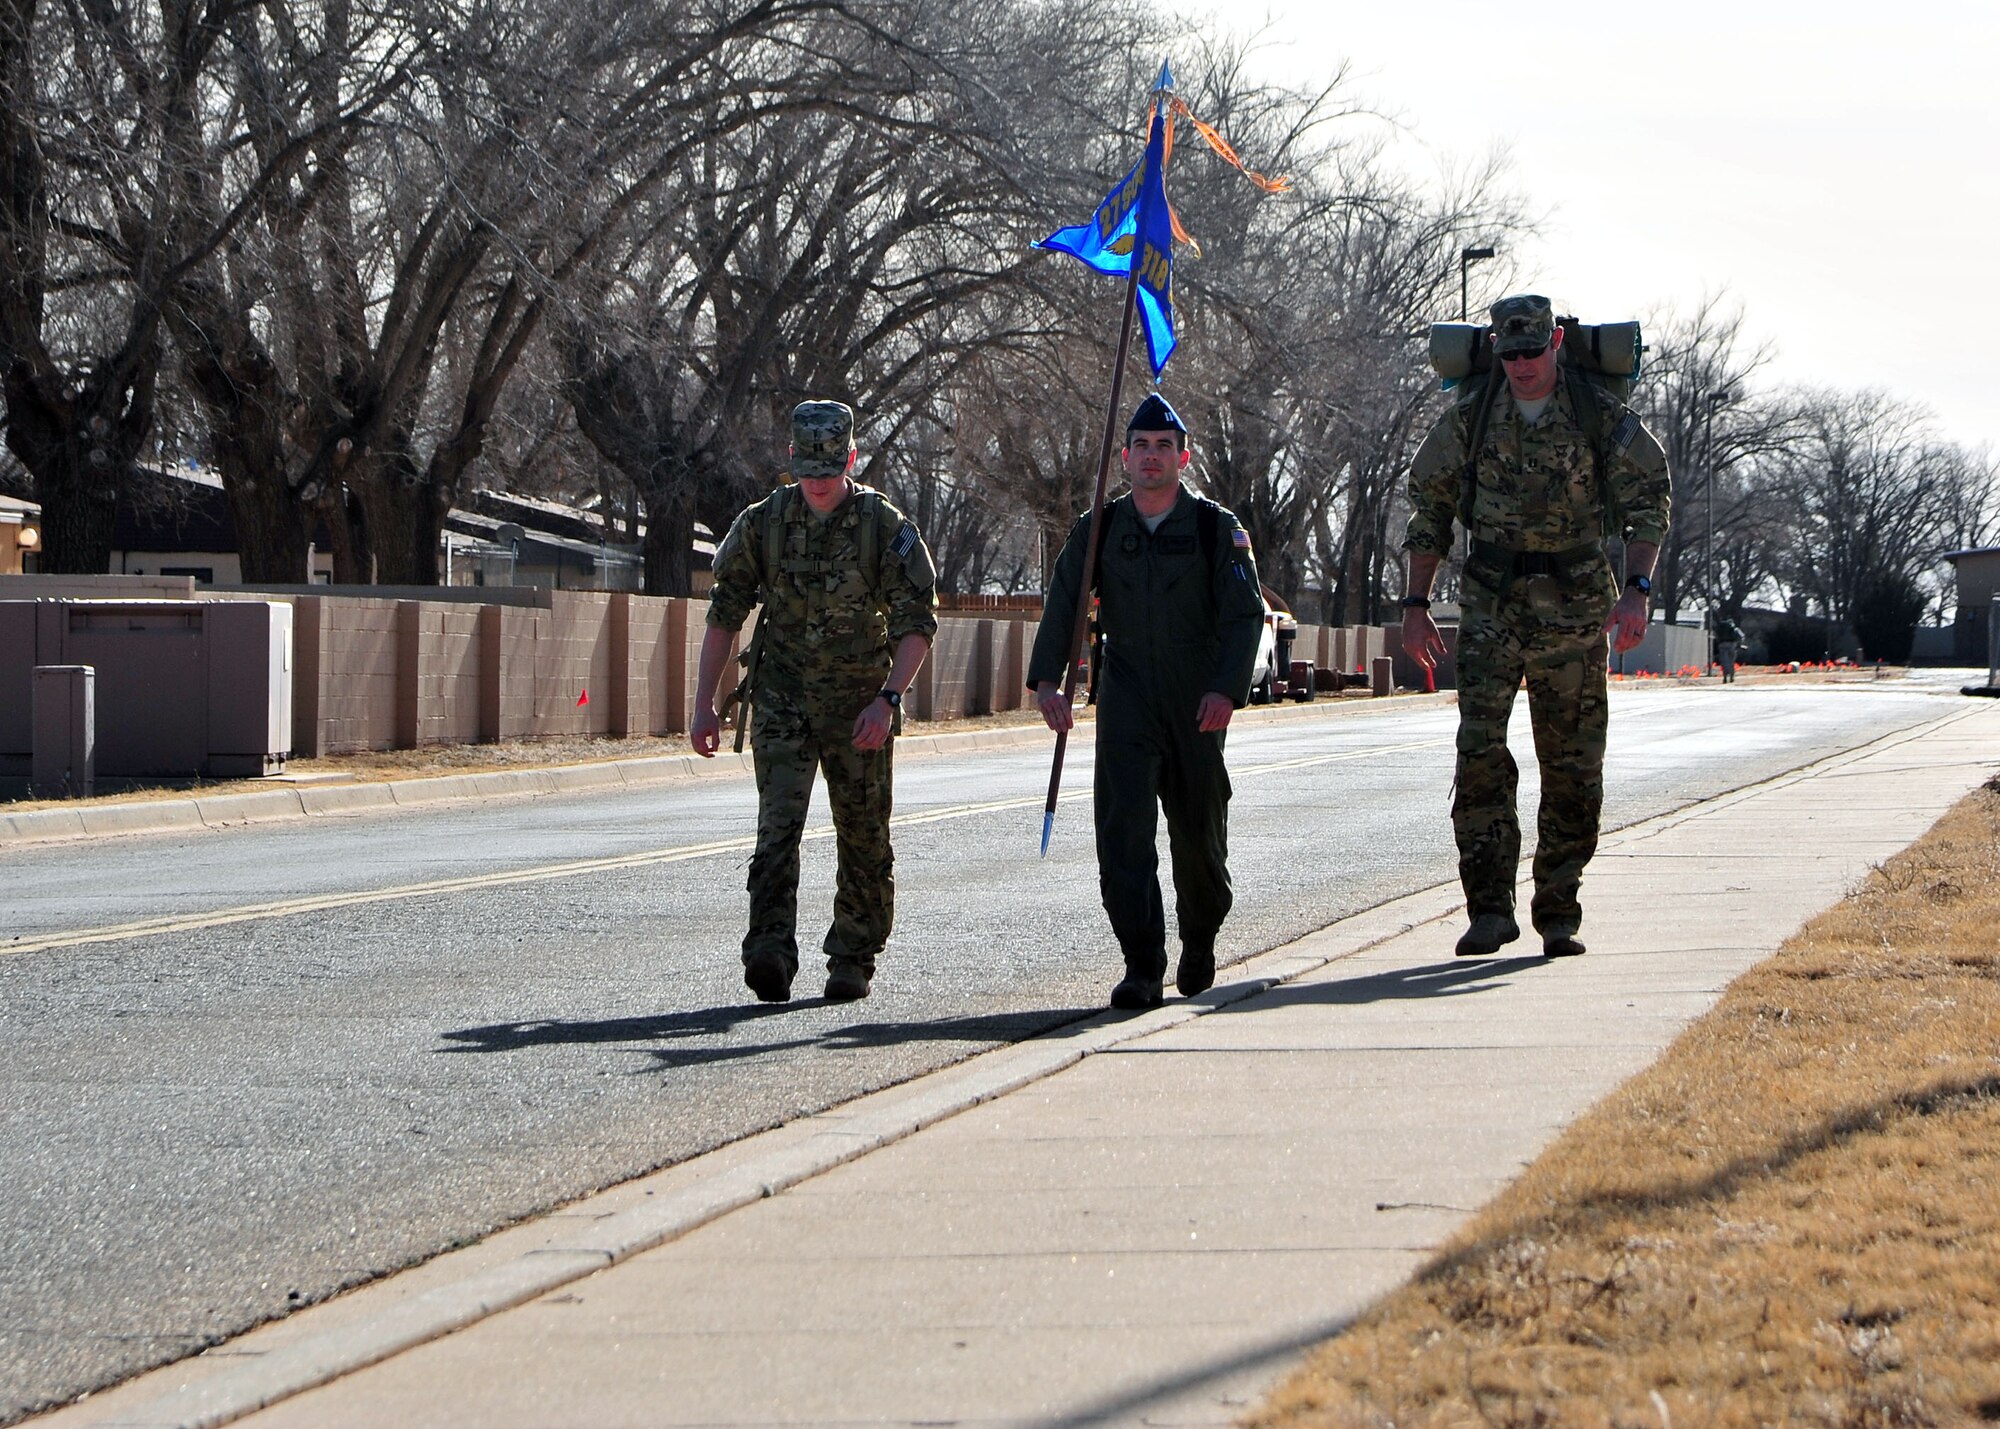 U.S. Air Force Air Commandos from Cannon Air Force Base, N.M., walk during a six-mile memorial ruck march, Feb. 18, 2014 at Cannon’s Unity Park. The march was conducted in honor of Capt. Ryan Hall, Capt. Nicholas Whitlock, 1st Lt. Justin Wilkens and Senior Airman Julian Scholten, the aircrew members who lost their lives when “Ratchet 33”, a U-28A, crashed in Djibouti, Africa, Feb. 18, 2012. (U.S. Air Force photo/Senior Airman Whitney Amstutz)